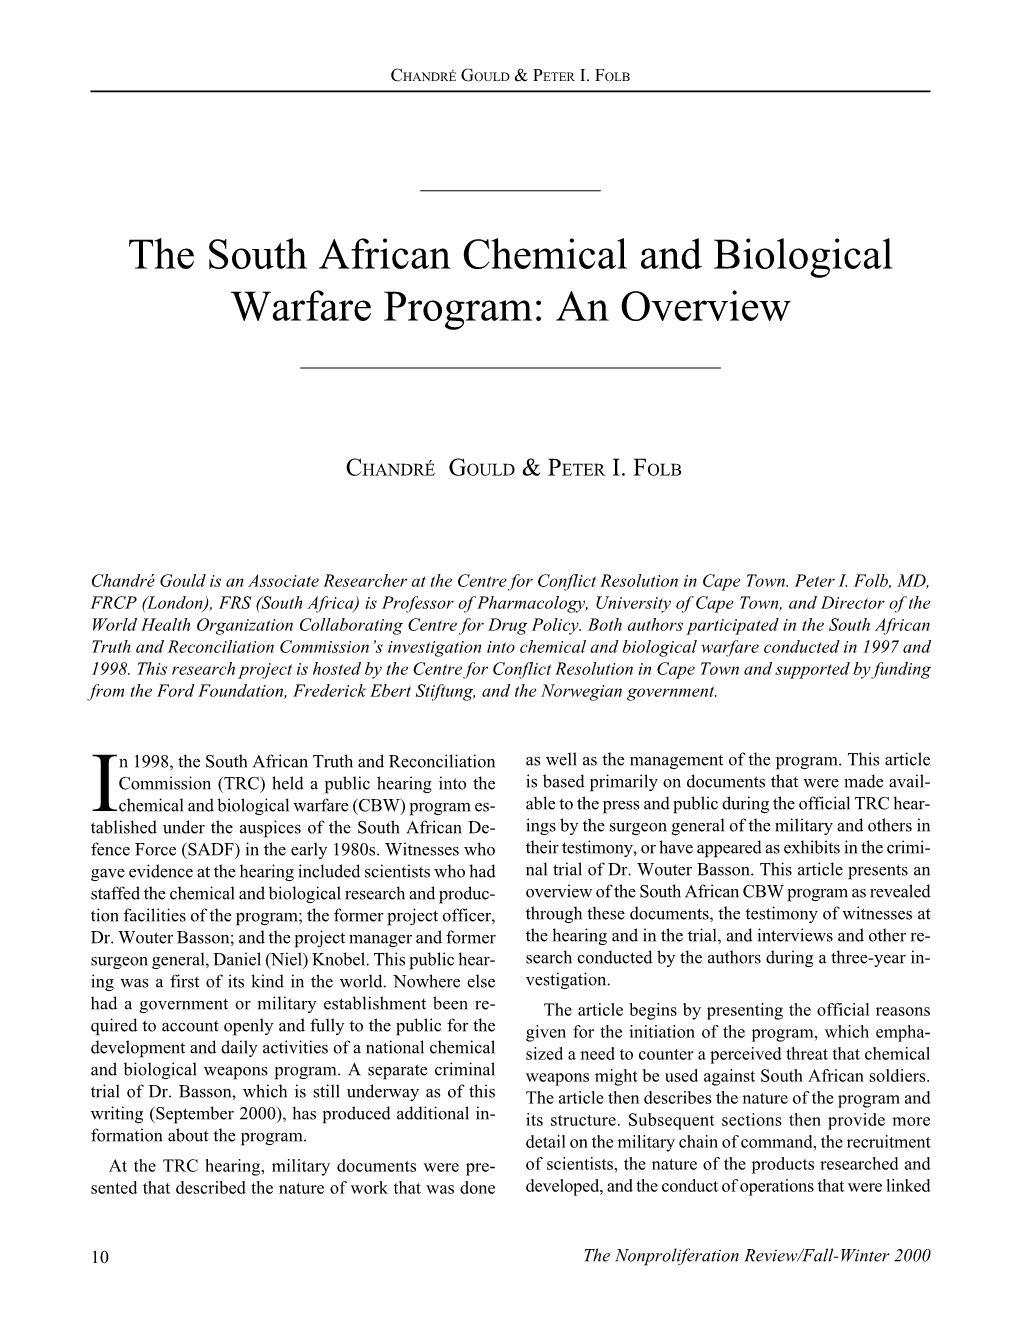 NPR73: the South African Chemical and Biological Warfare Program